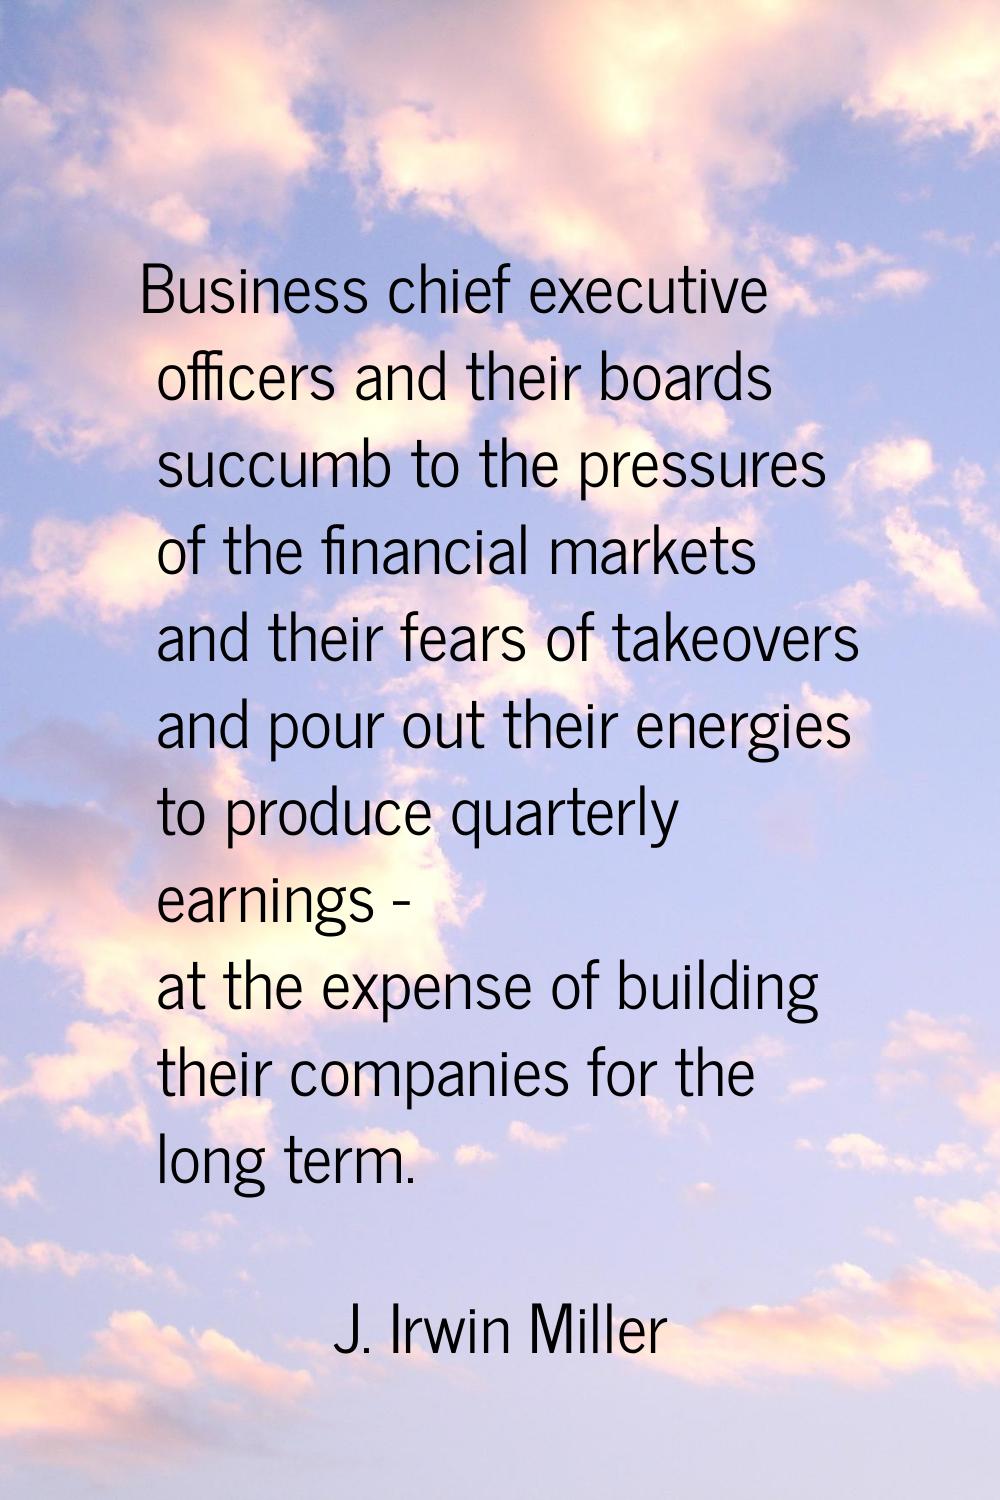 Business chief executive officers and their boards succumb to the pressures of the financial market